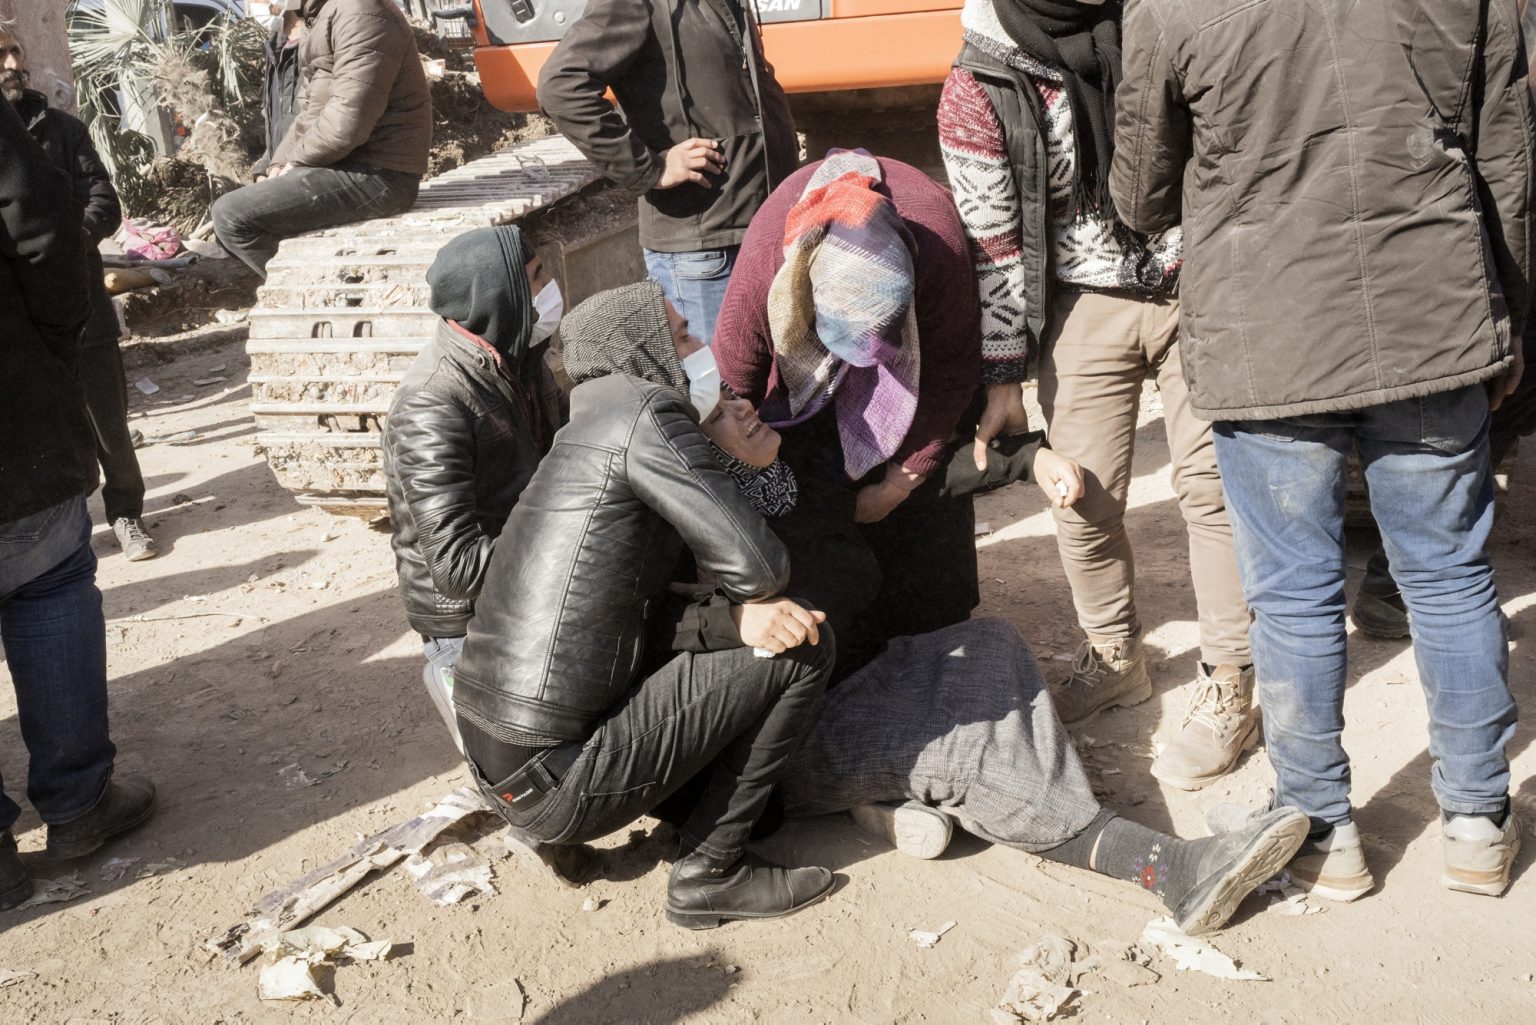 Adiyaman, Turkey, February 2023 - The aftermath of the earthquake that hit southern Turkey and northern Syria. Sabiha cries after her brother's lifeless body was recovered under the rubble.><
Adiyaman, Turchia, febbraio 2023  Le conseguenze del terremoto che ha colpito la Turchia del Sud e la Siria del nord.